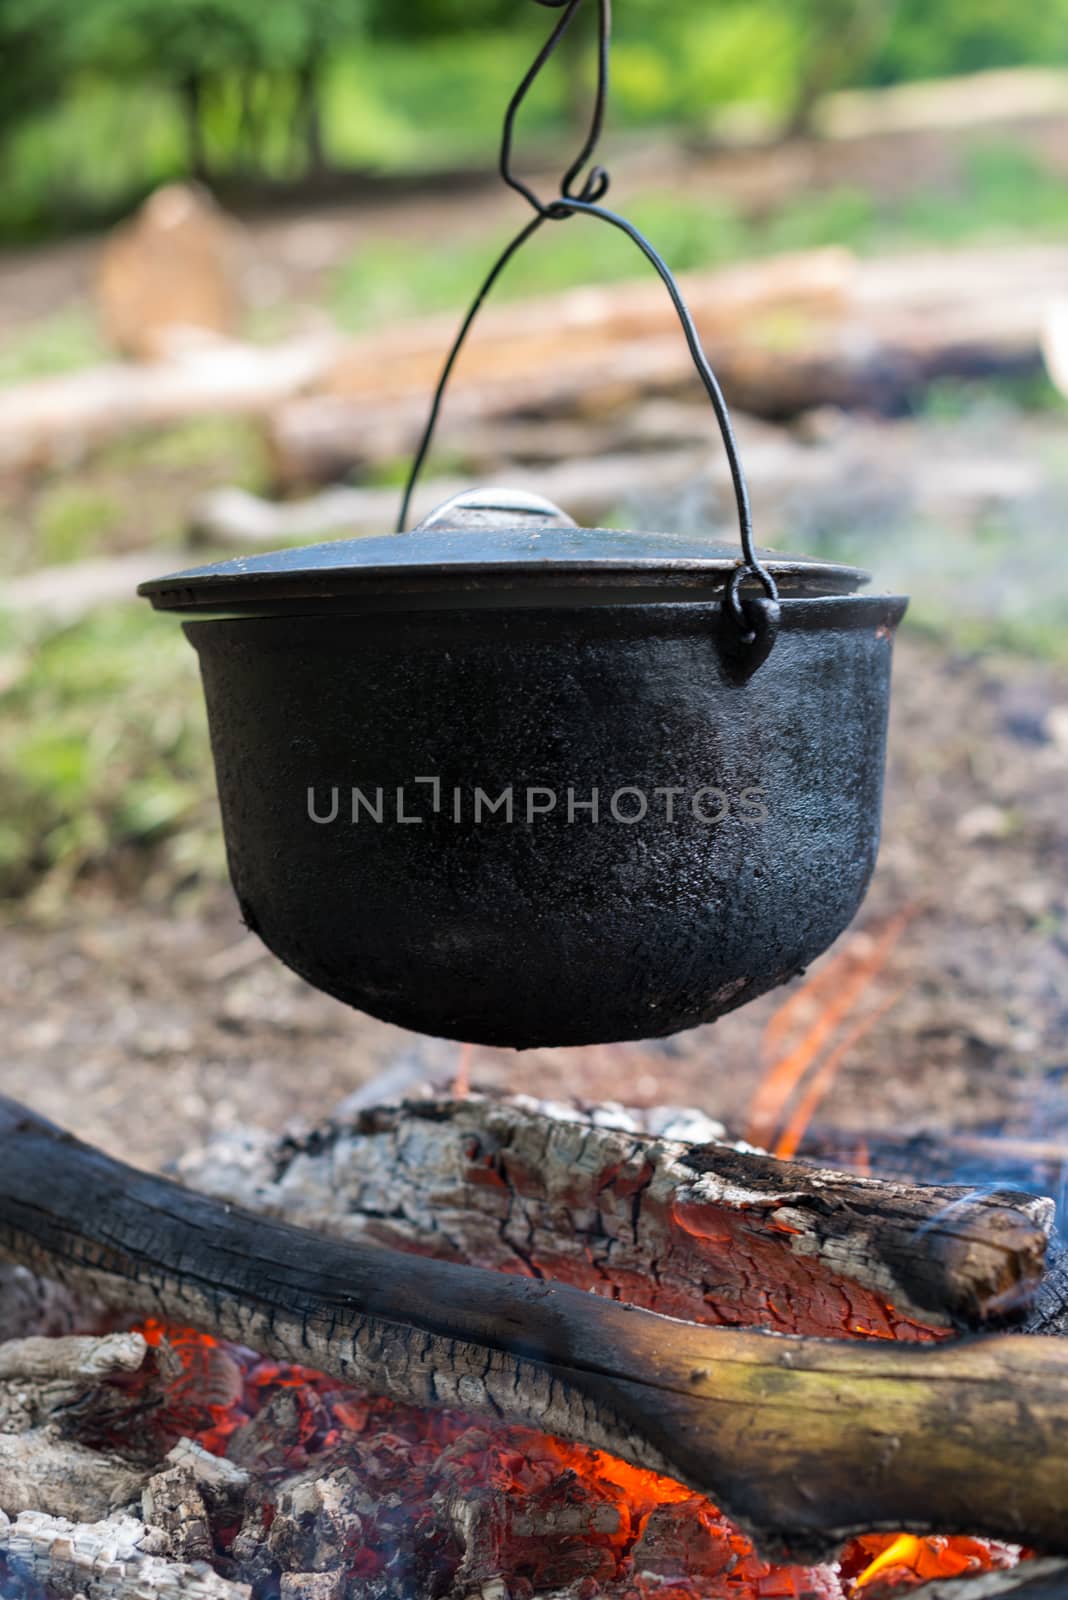 Cooking in the cauldron on the open fire.